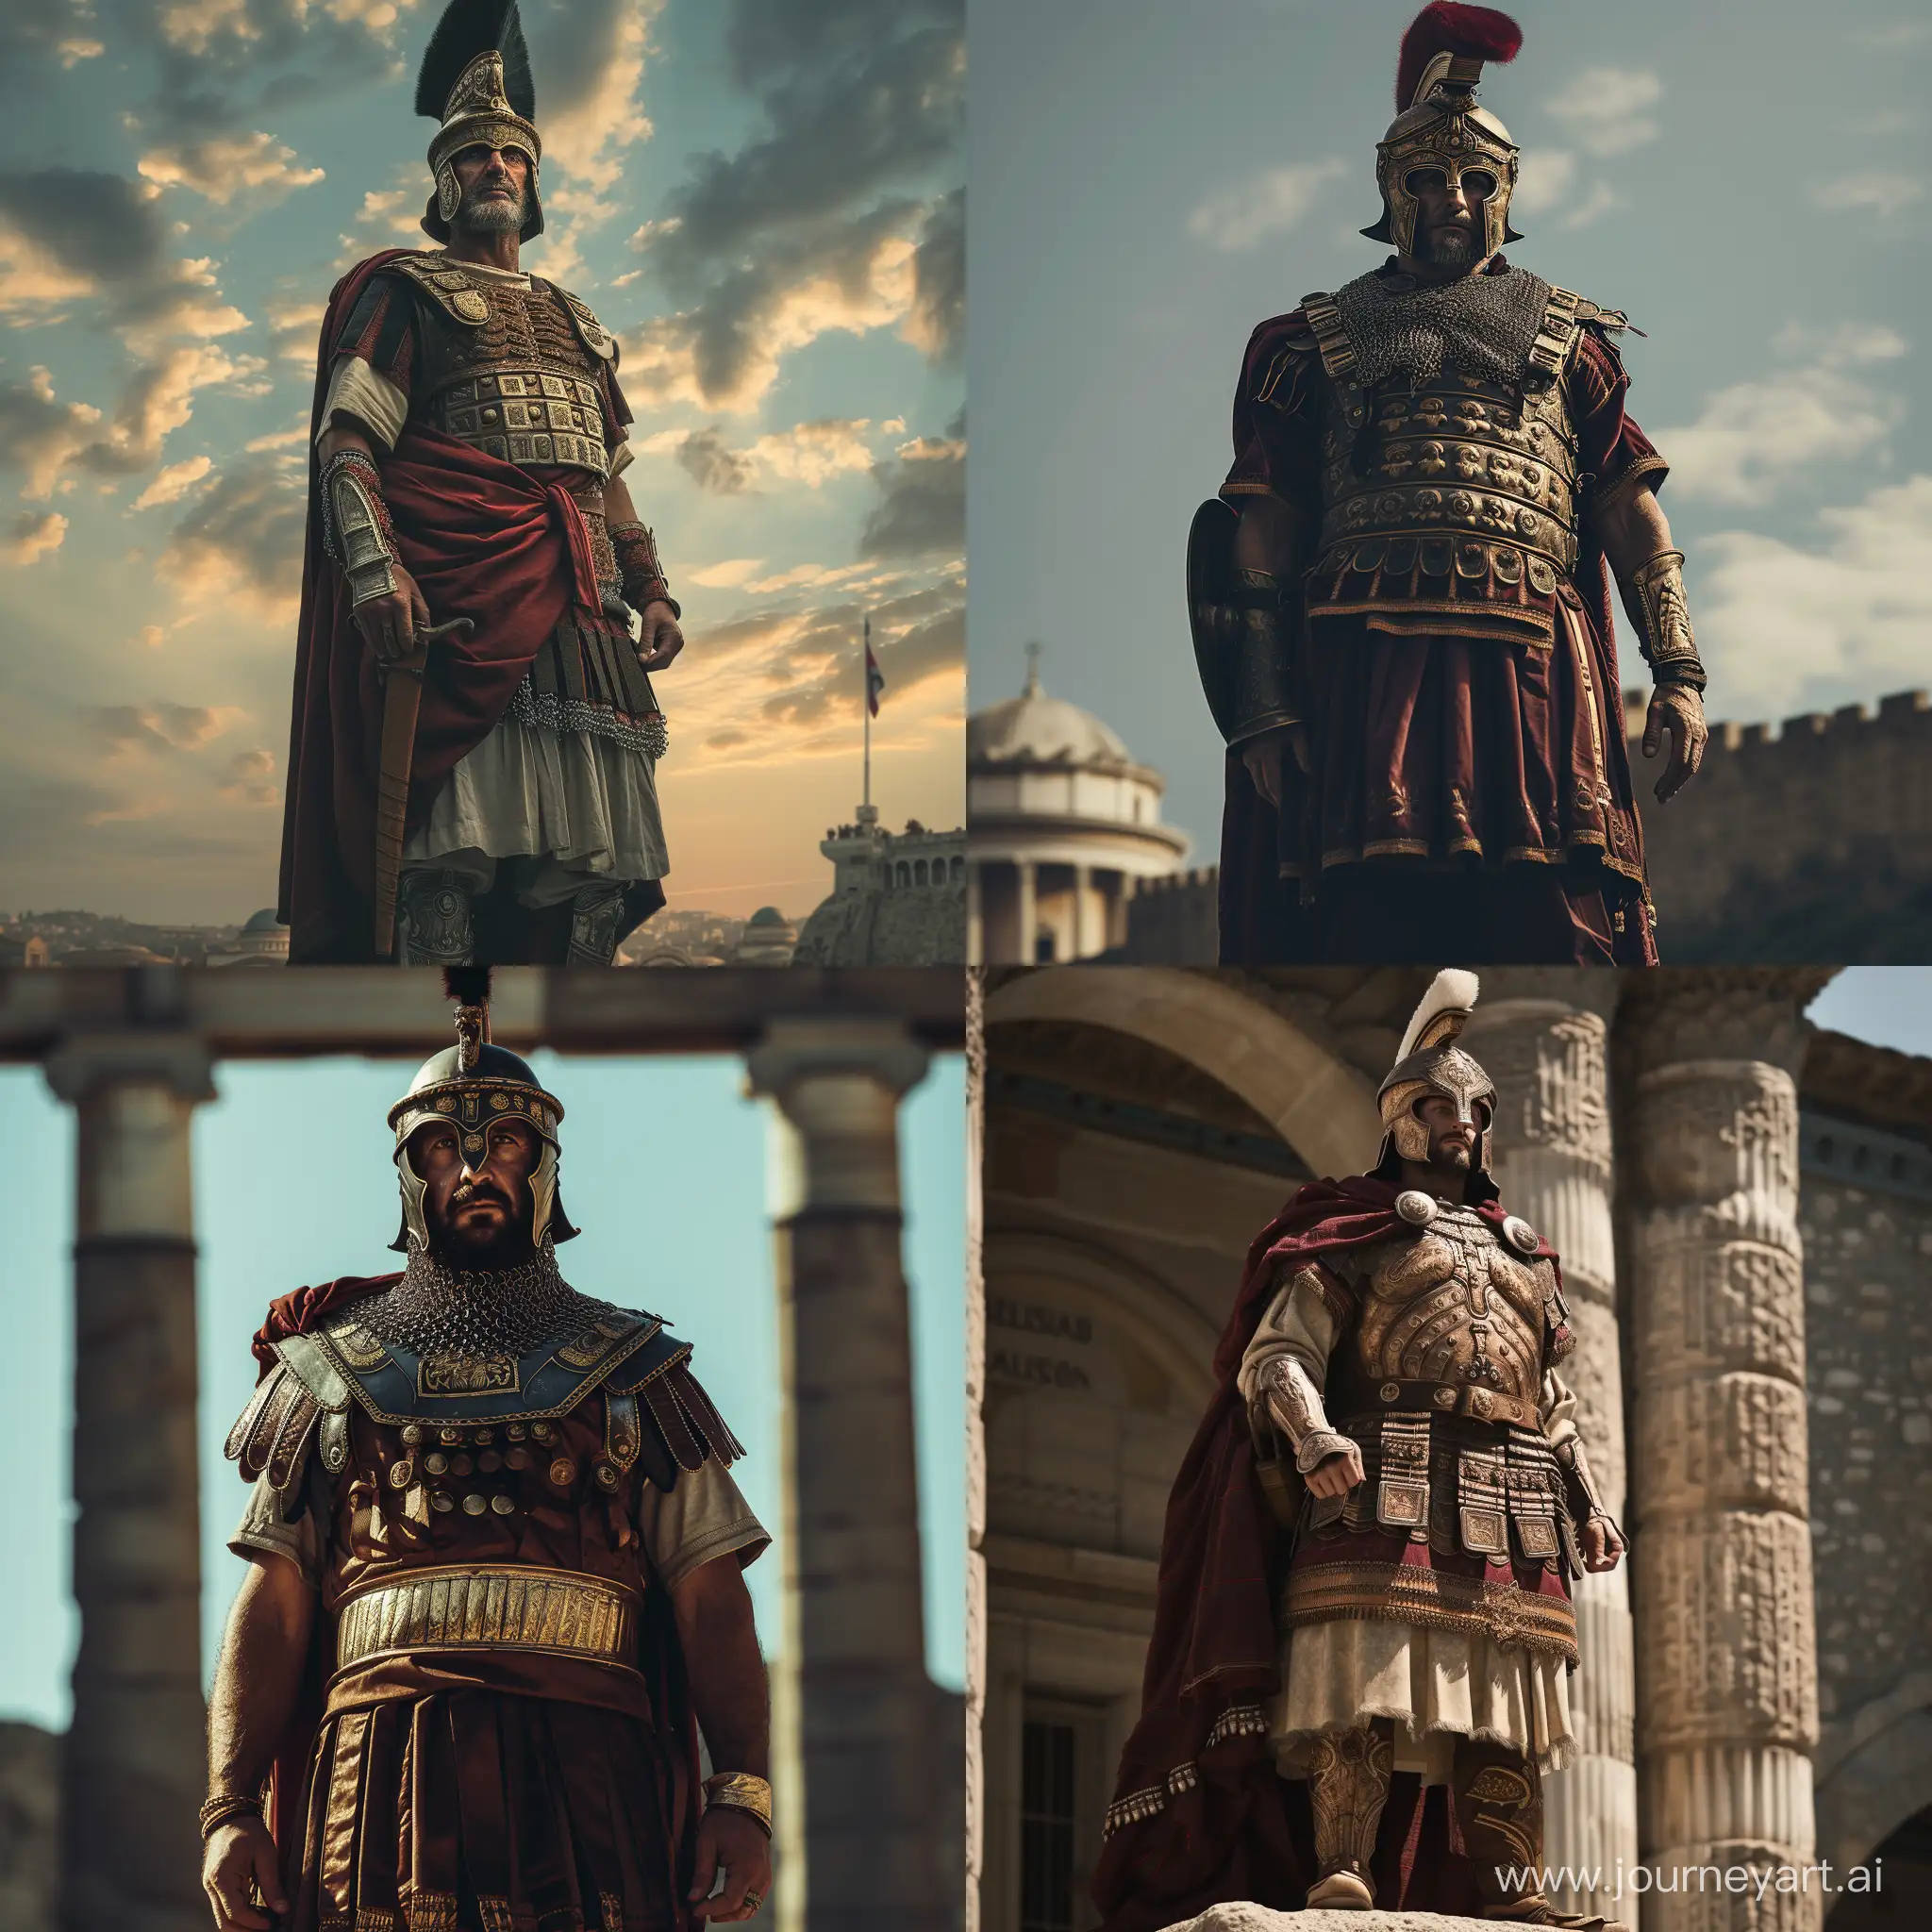 Byzantine General Belisarius standing tall at Constantinople. He is wearing his General attire and helmet. He seems proud and brave. Realistic image.